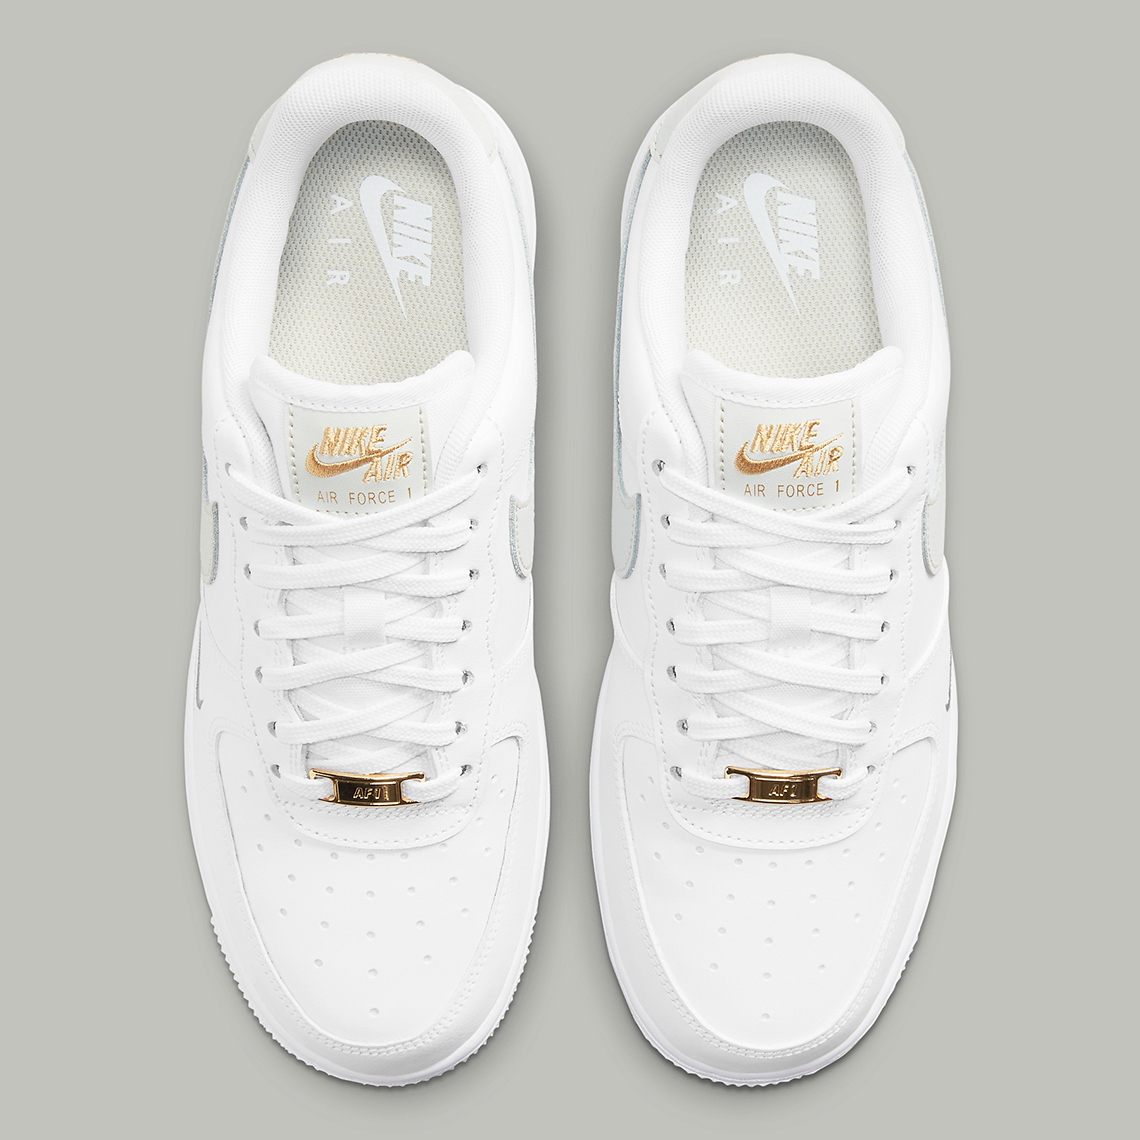 Nike Air Force 1 Cz0270 106 Release Info 4